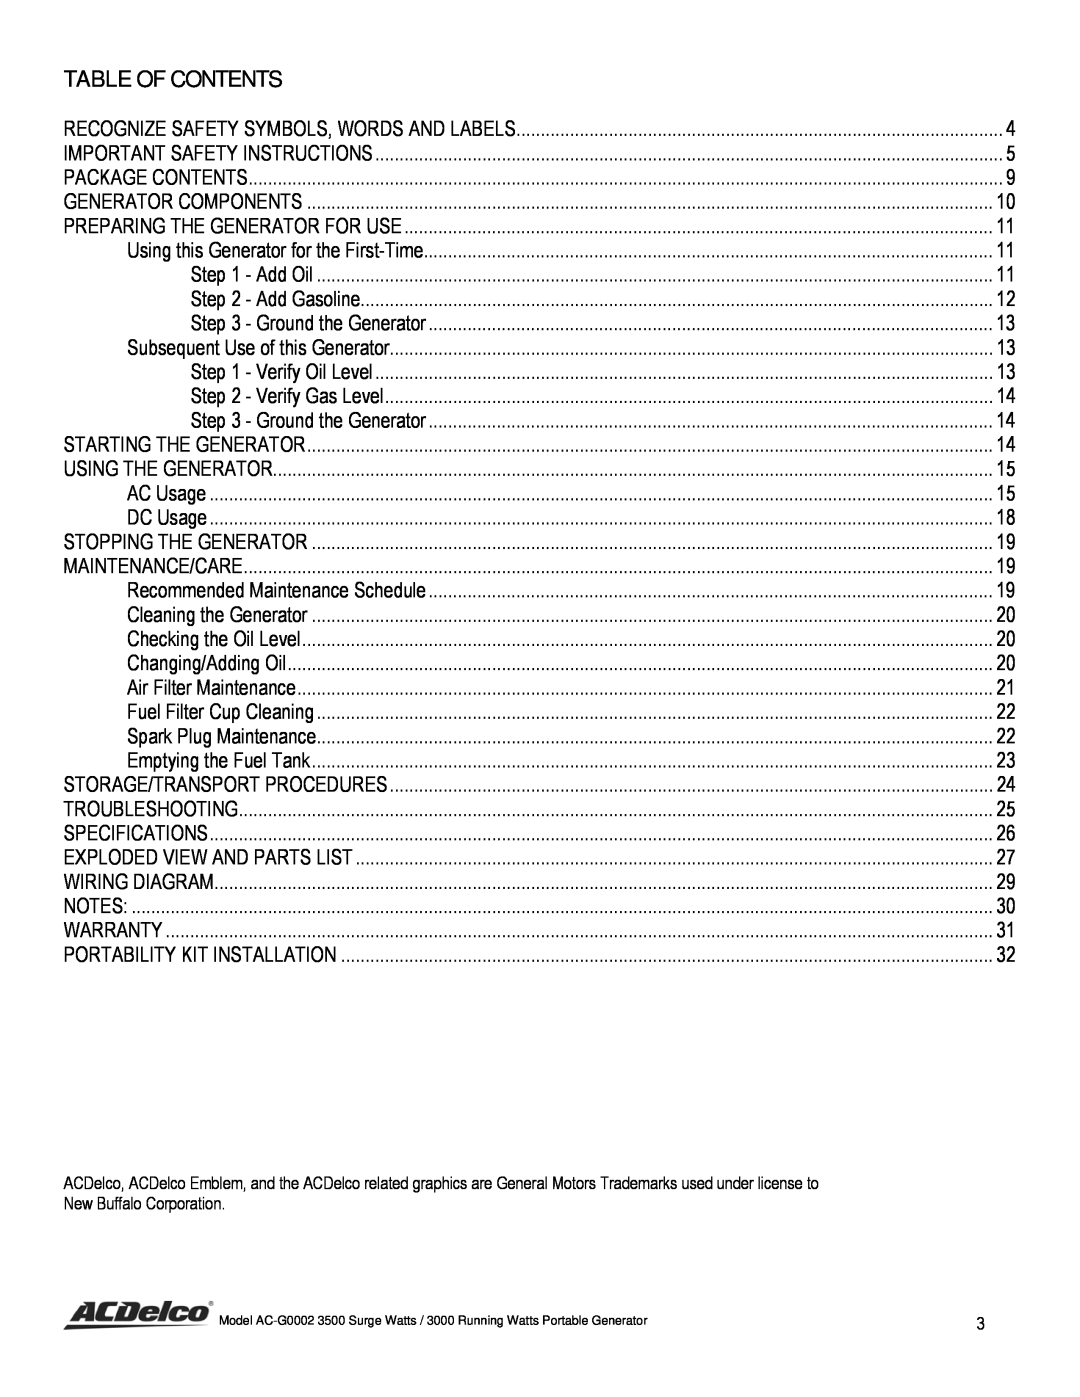 ACDelco AC-G0002 instruction manual Table Of Contents, Recognize Safety Symbols, Words And Labels 